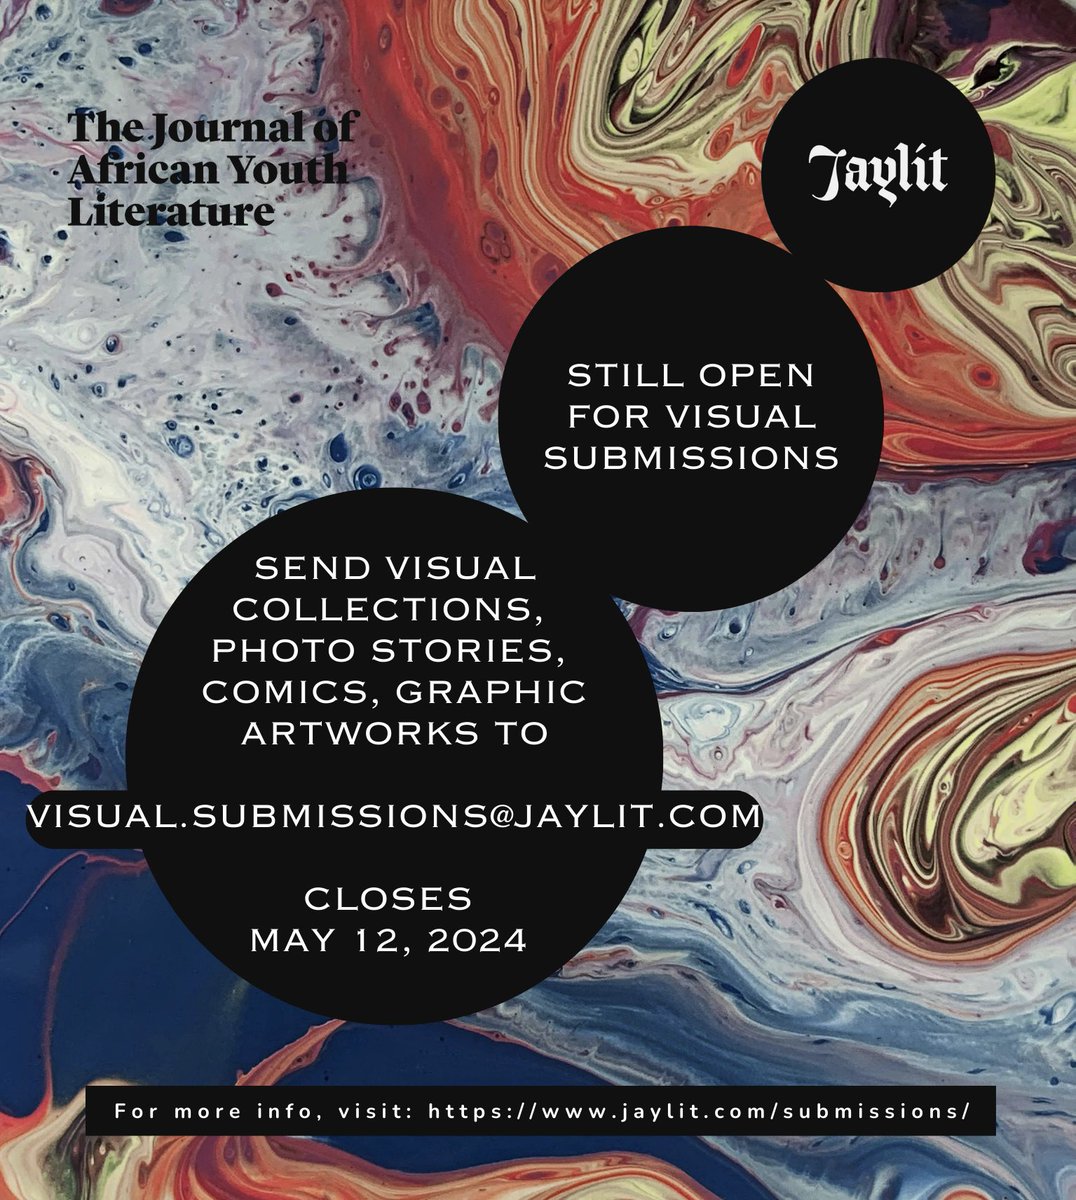 Our submission window is officially closed, but we got so little visual submissions, we’ve decided to keep visual submissions open until May 12, 2024. Find submission guidelines here: jaylit.com/submissions/